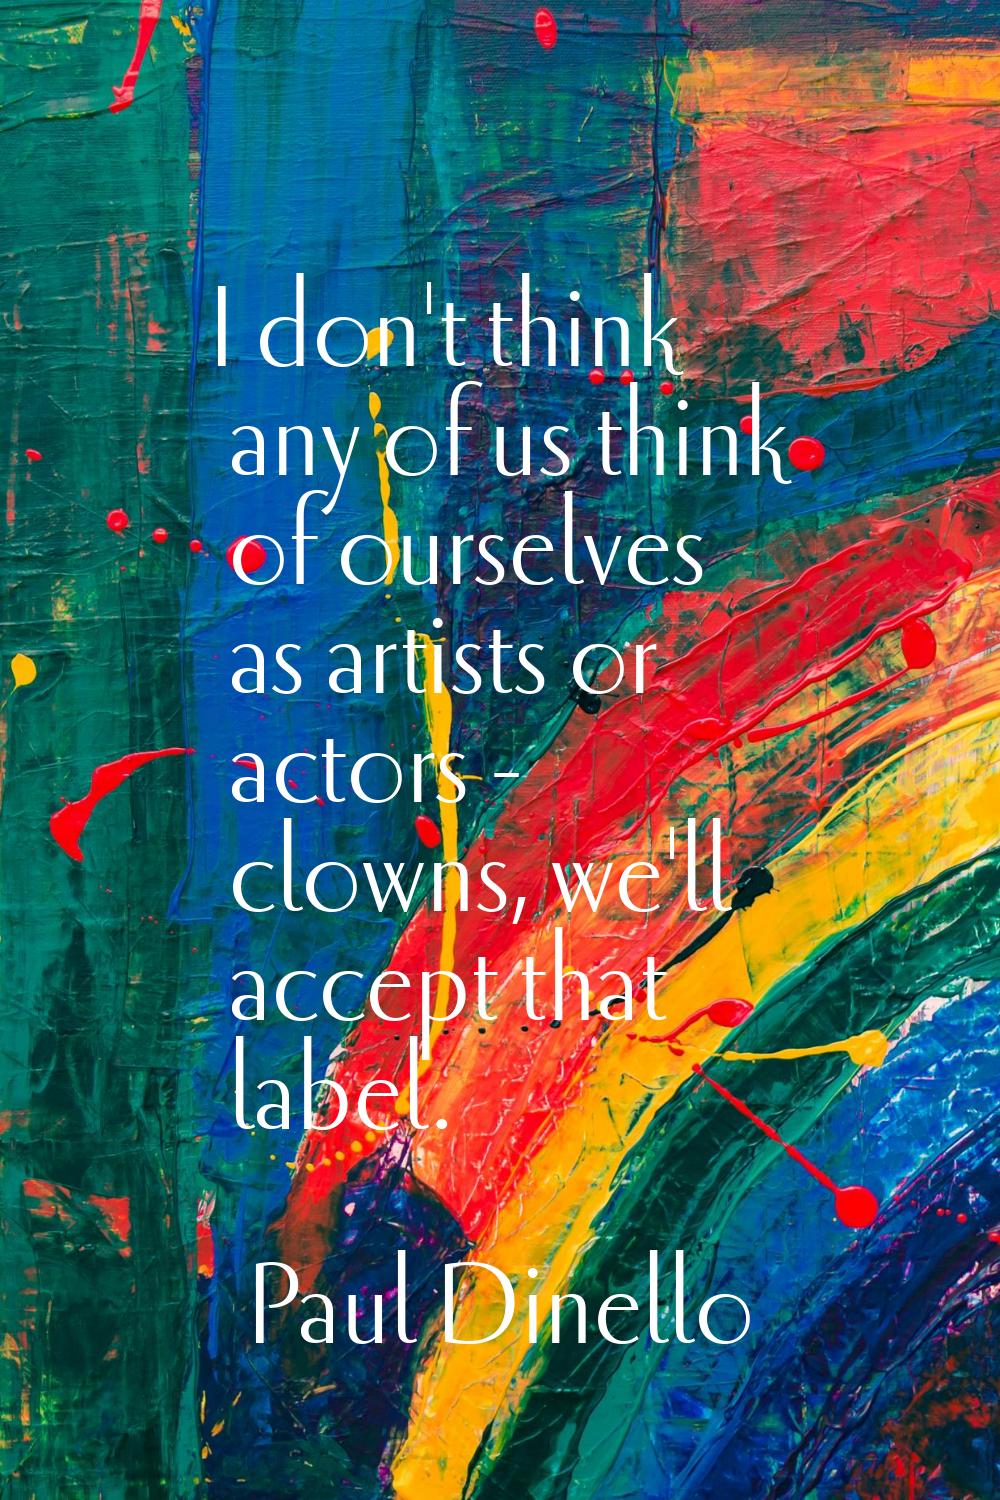 I don't think any of us think of ourselves as artists or actors - clowns, we'll accept that label.